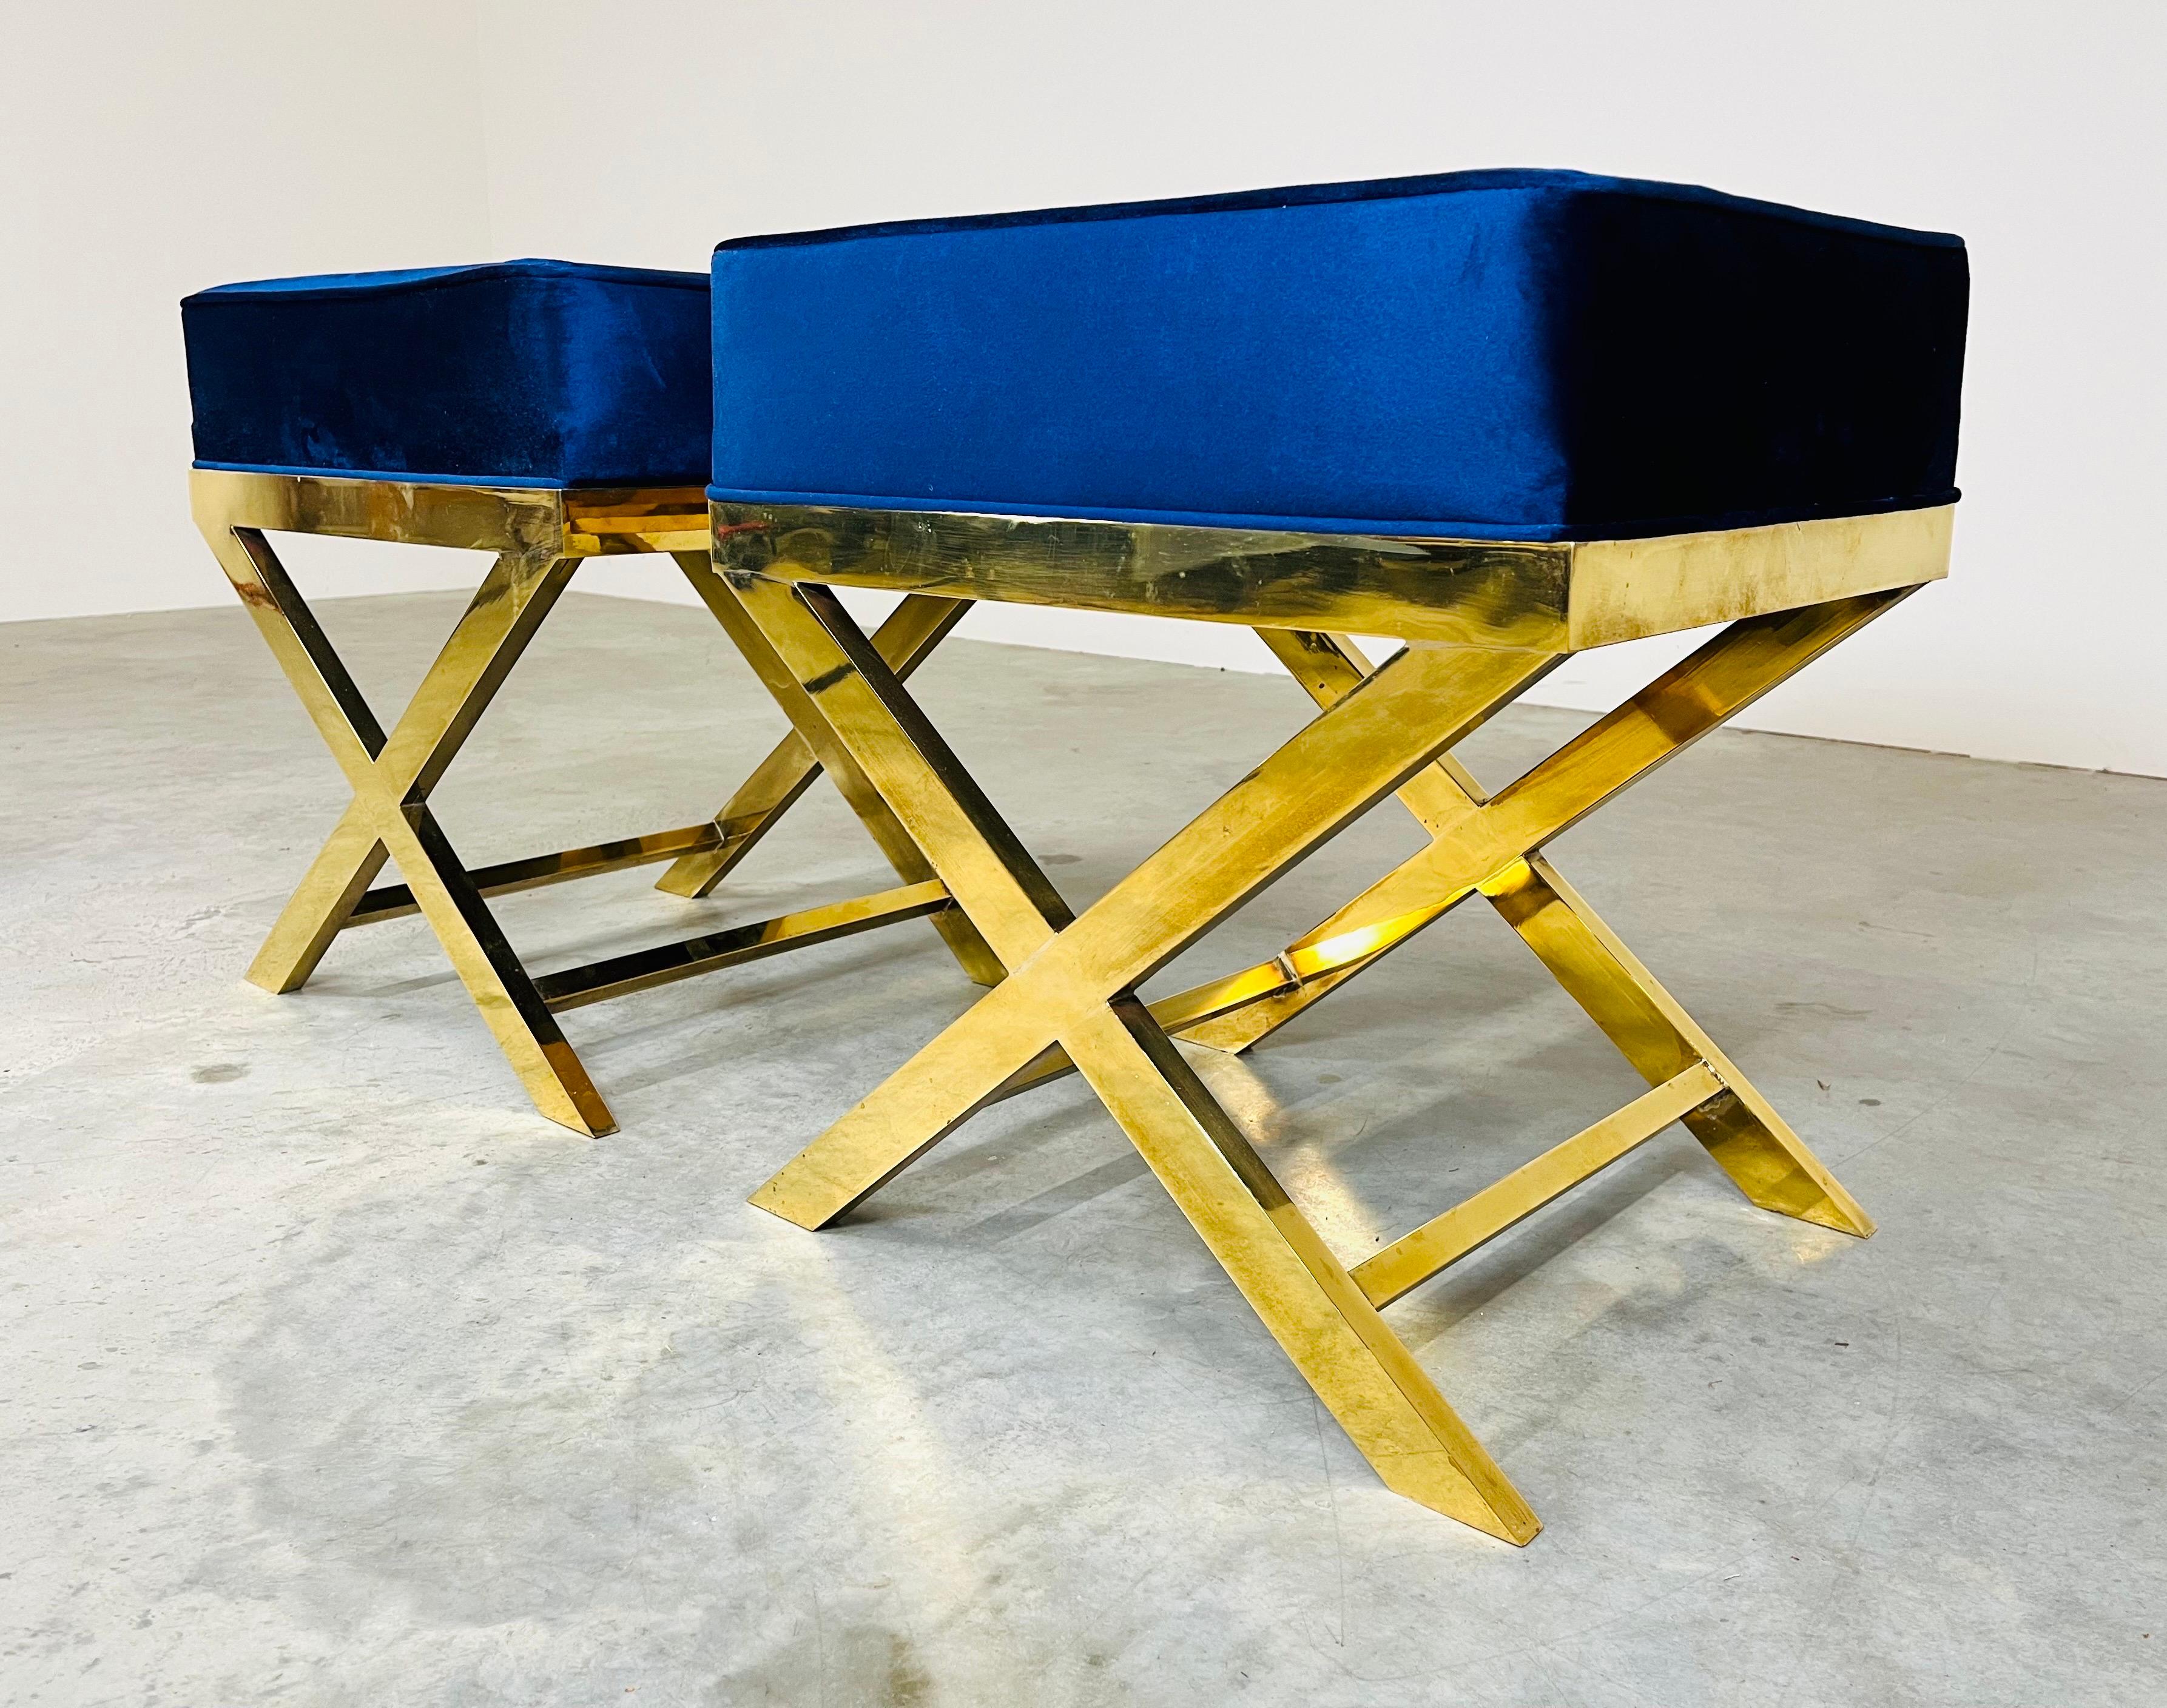 Fully restored solid flat bar brass pair of X benches or stools in the manner of Charles Hollis Jones. 1960's Italy polished brass with new plush deep blue velvet cushions each possessing substantial weight.
21.25x20.25x16.25” HWD.